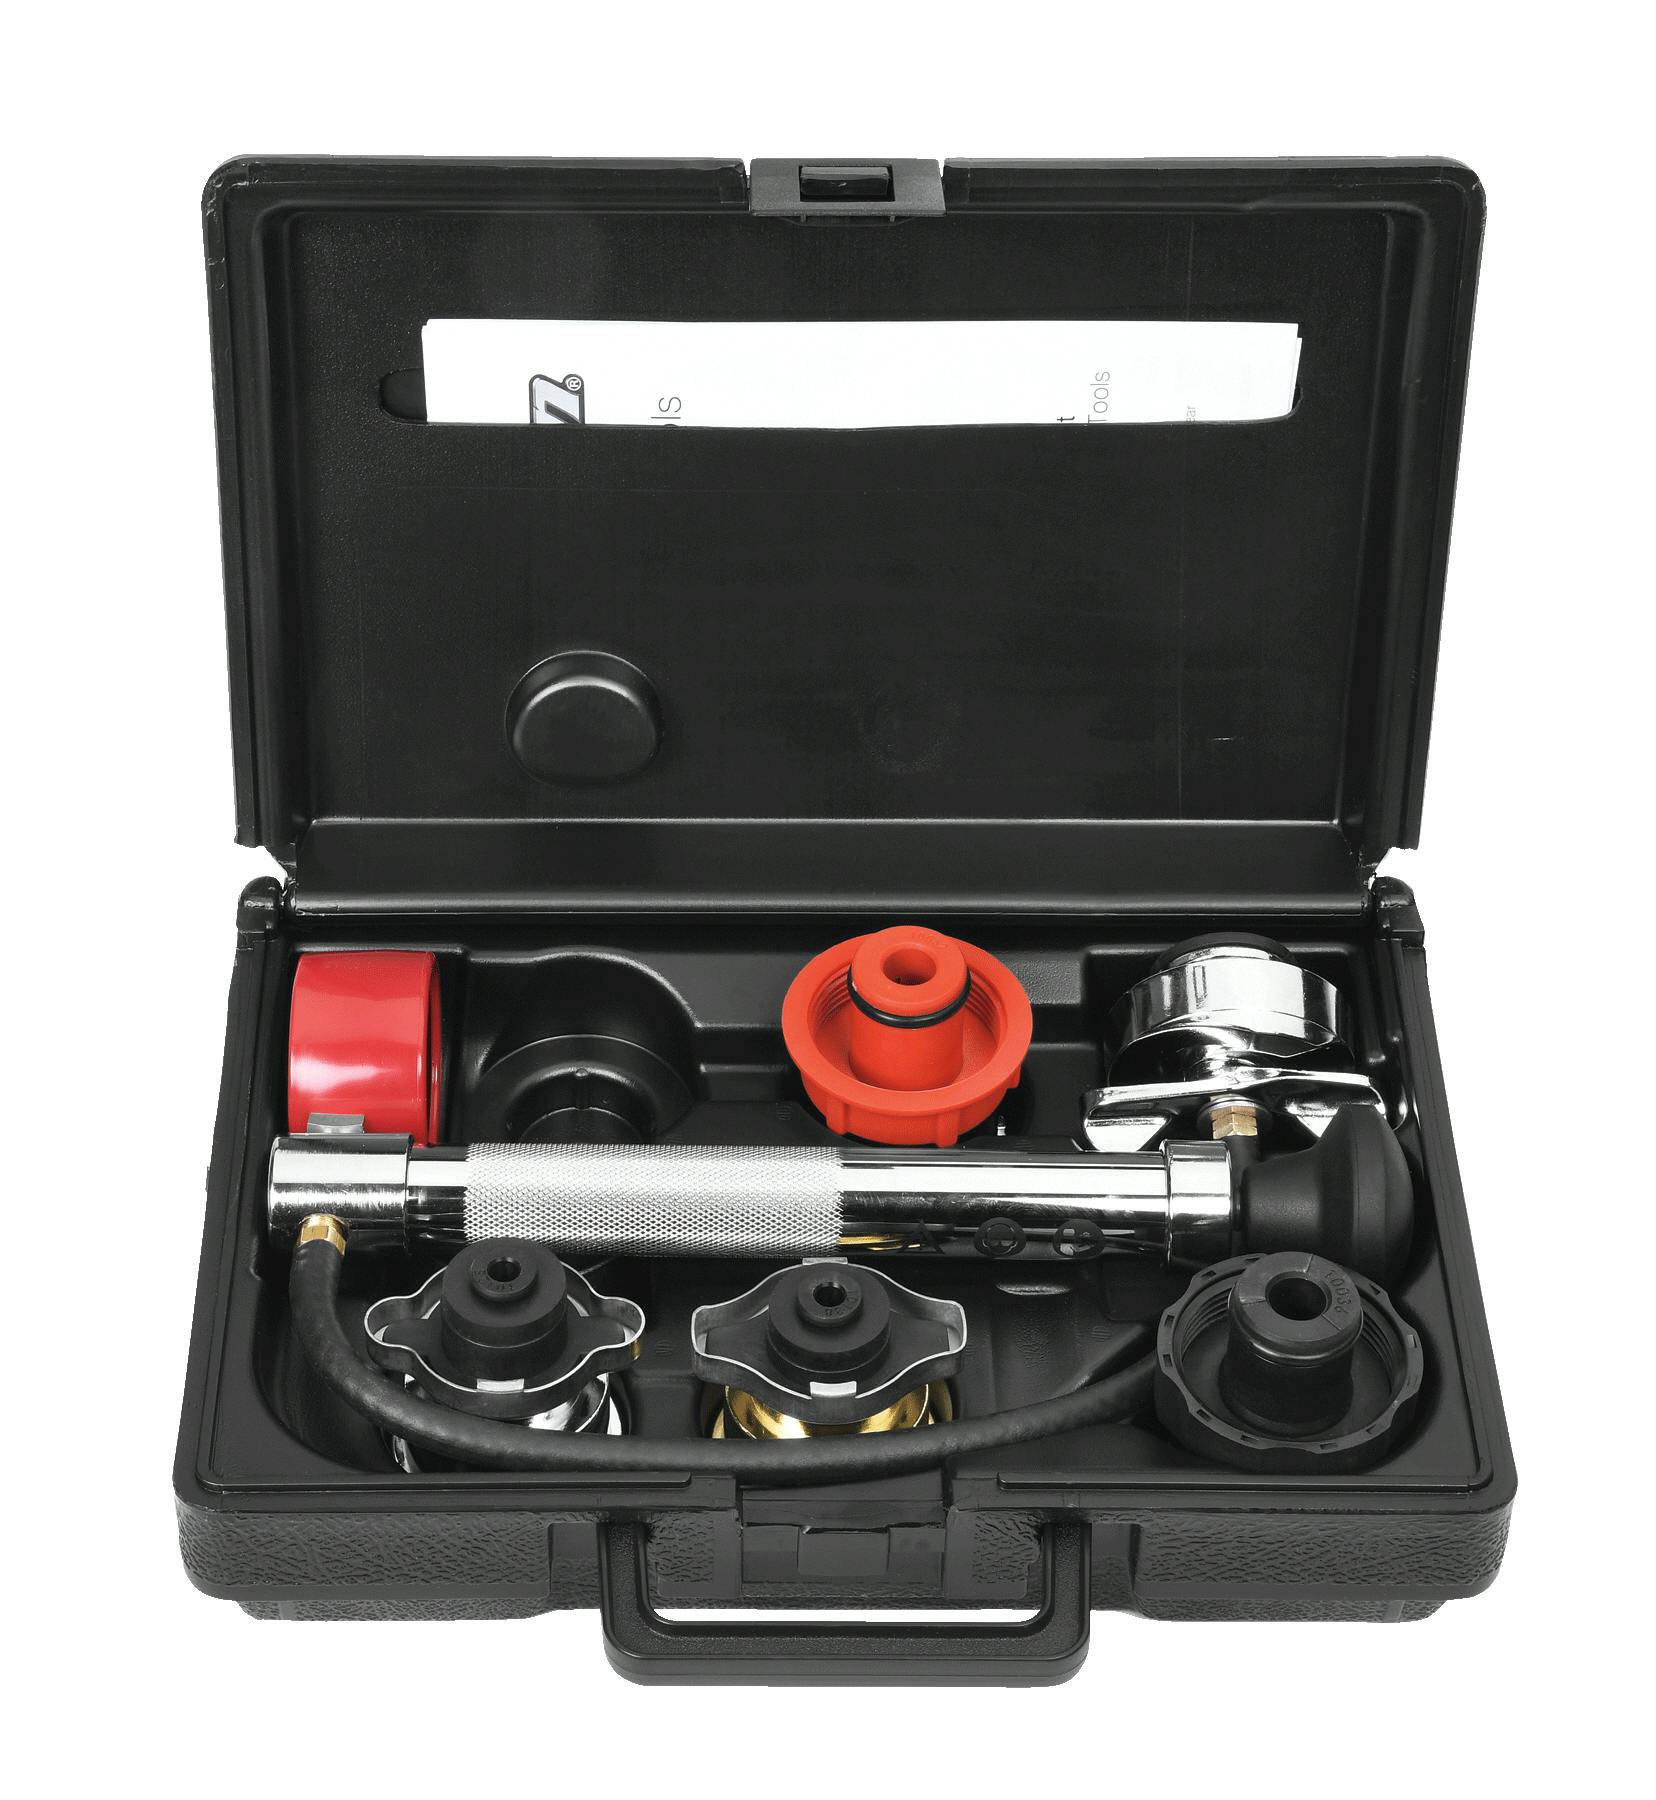 Cooling System Pressure Tester Kit | SVTS272A | Snap-on Store